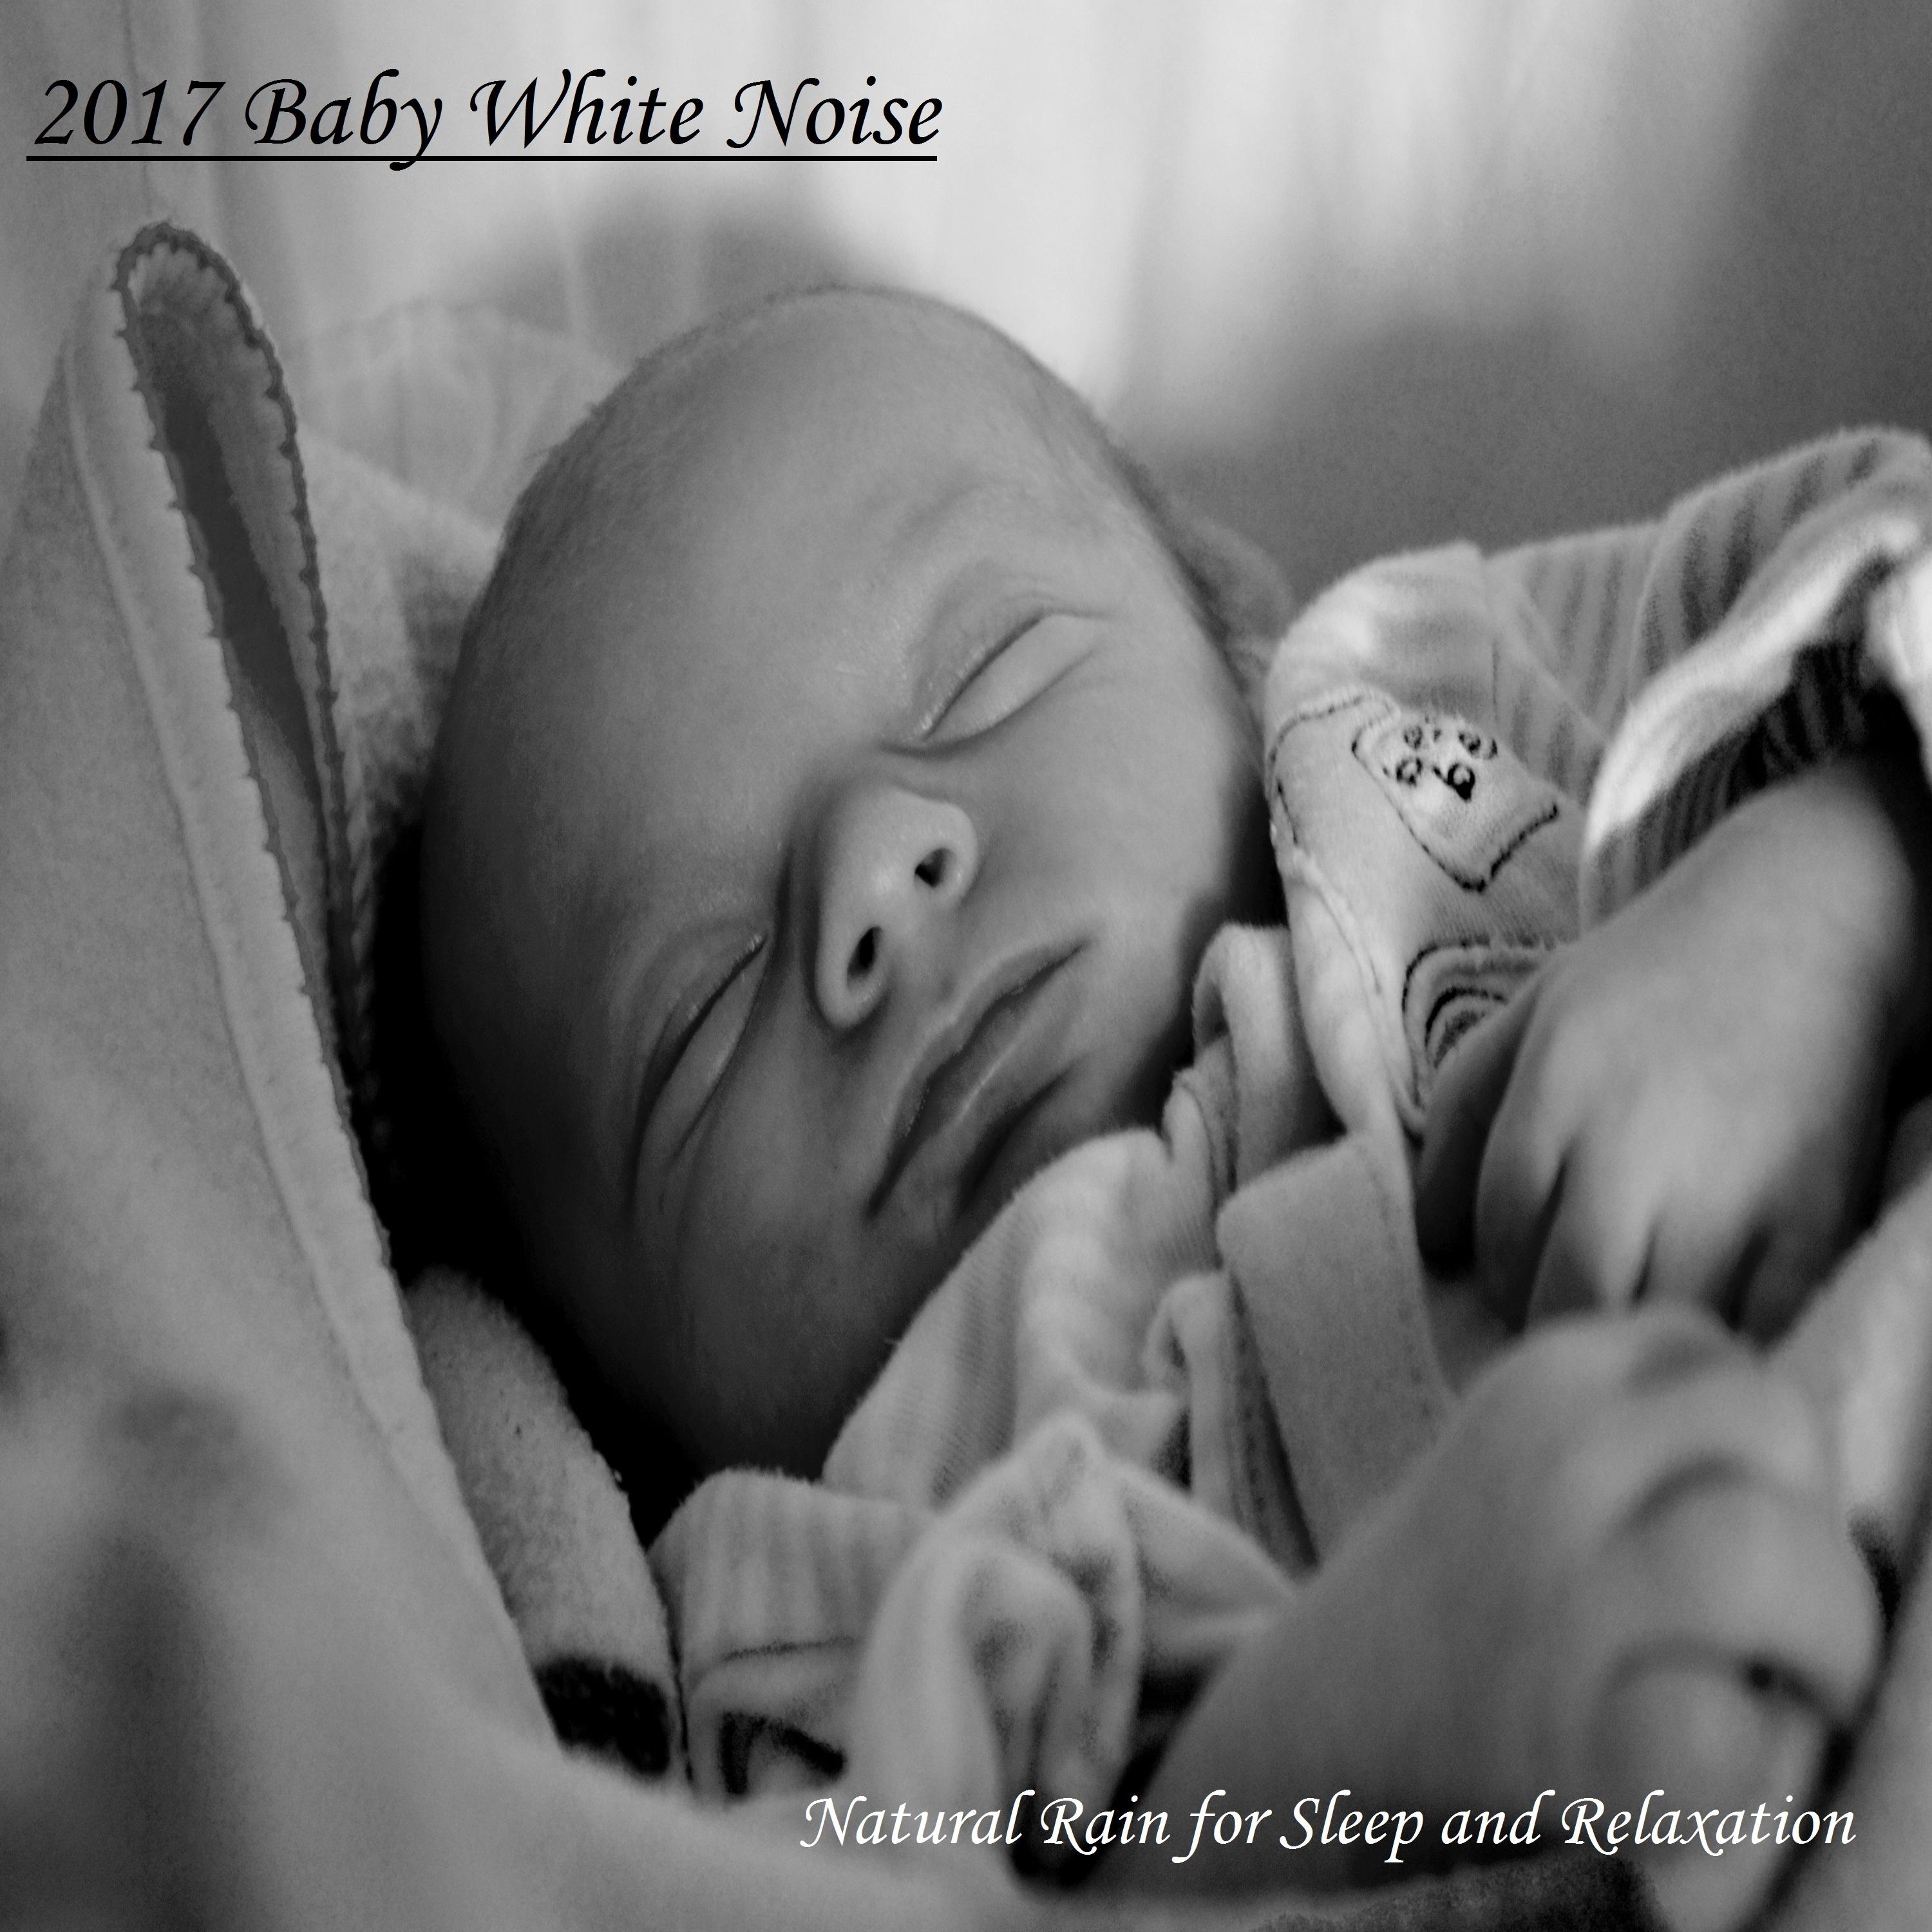 2017 Baby White Noise. Natural Rain for Sleep and Relaxation